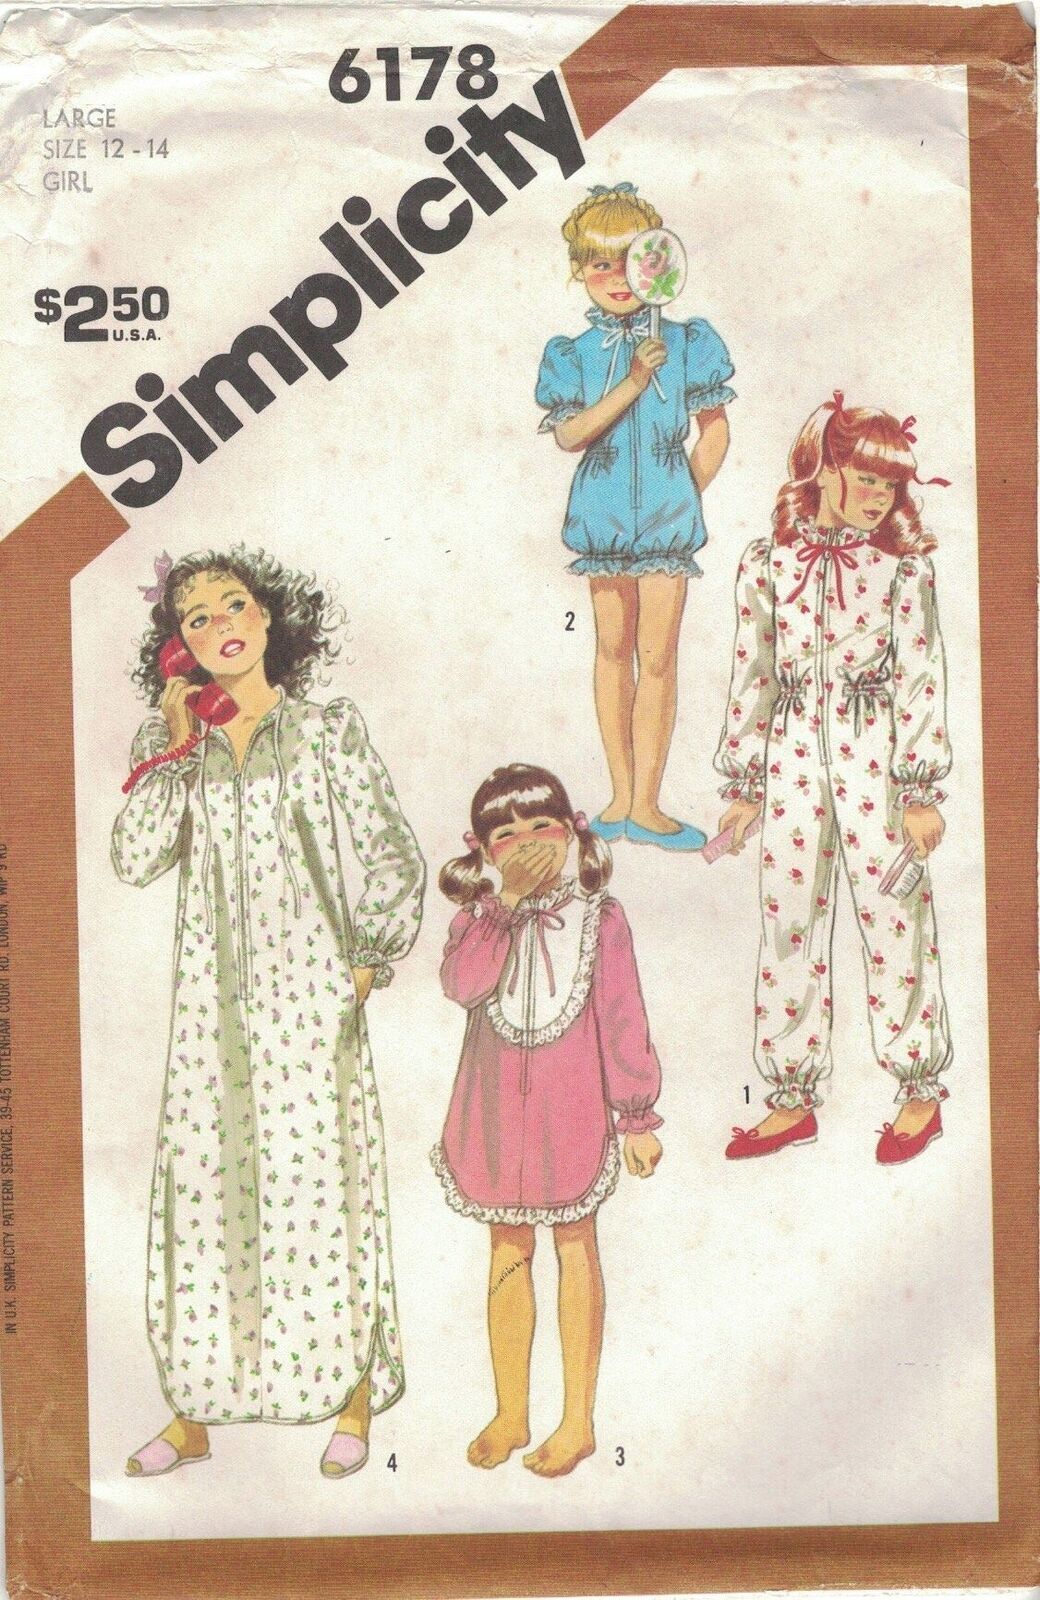 Primary image for Vintage Simplicity 6178 Zip Front Nightgown, Robe, One Piece Pajamas Girls 12-14